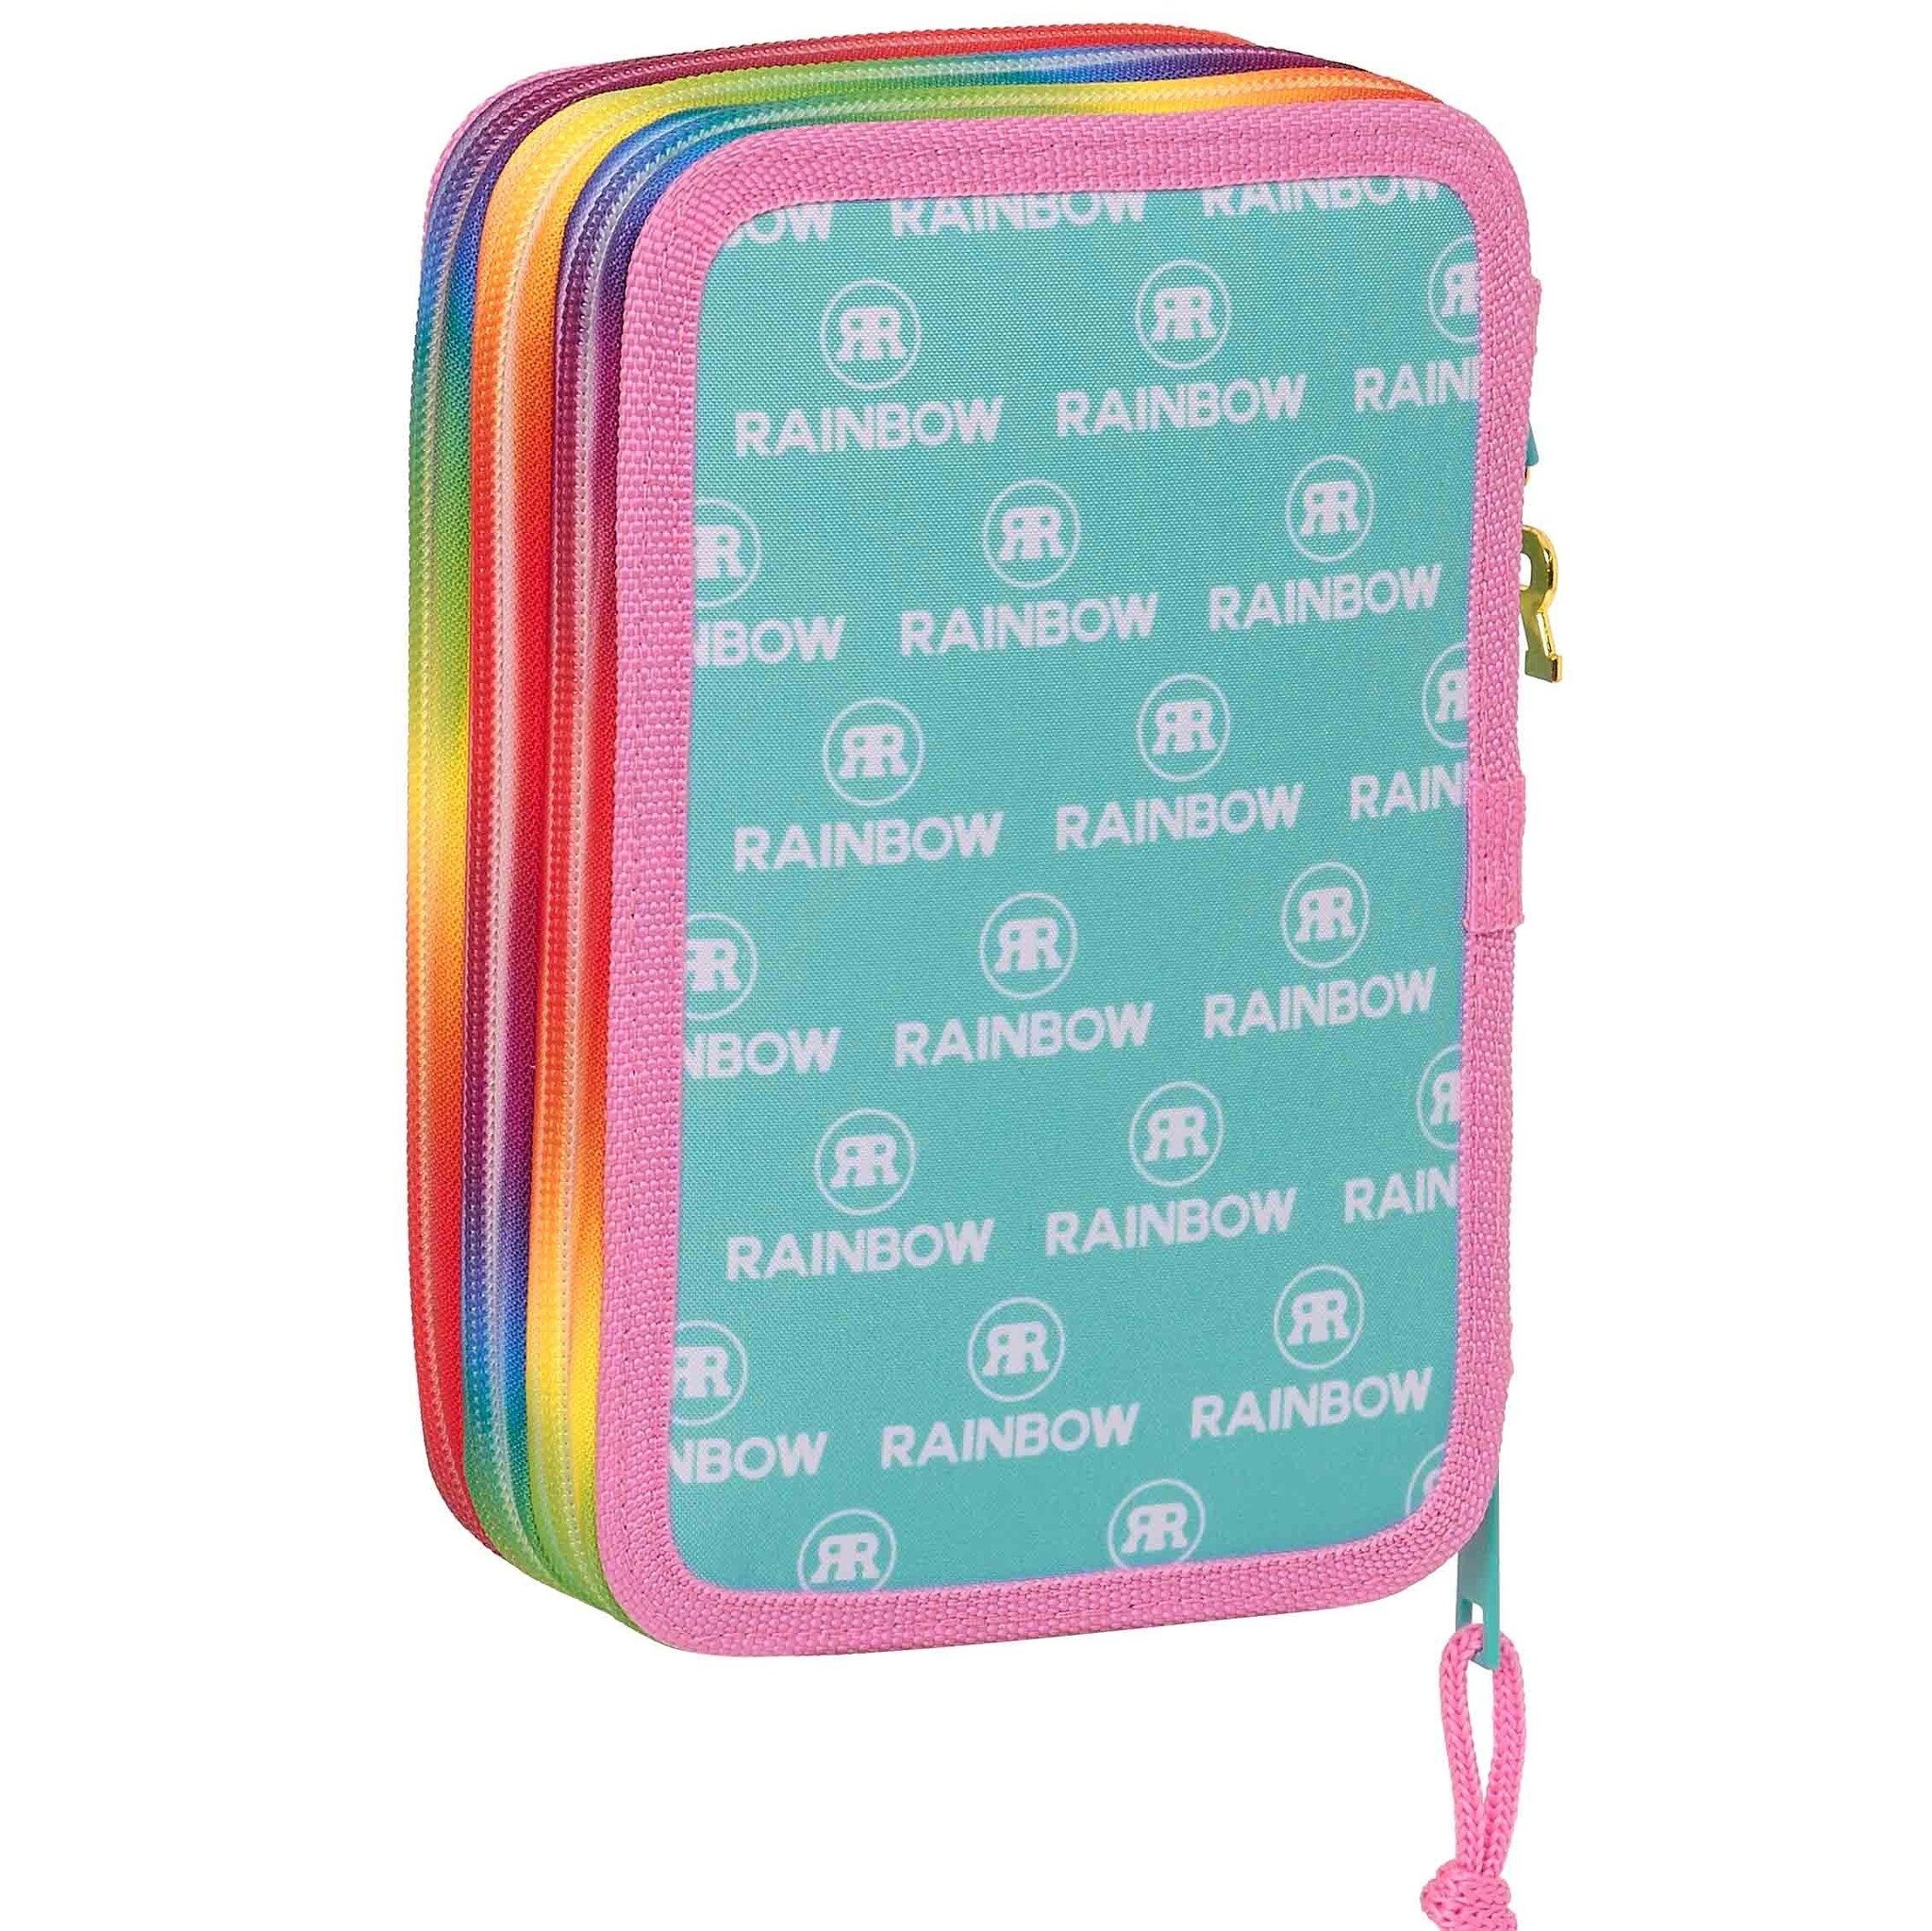 Rainbow High Filled Pouch, Paradise - 36 pieces - 19.5 x 12.5 x 5.5 cm - Polyester